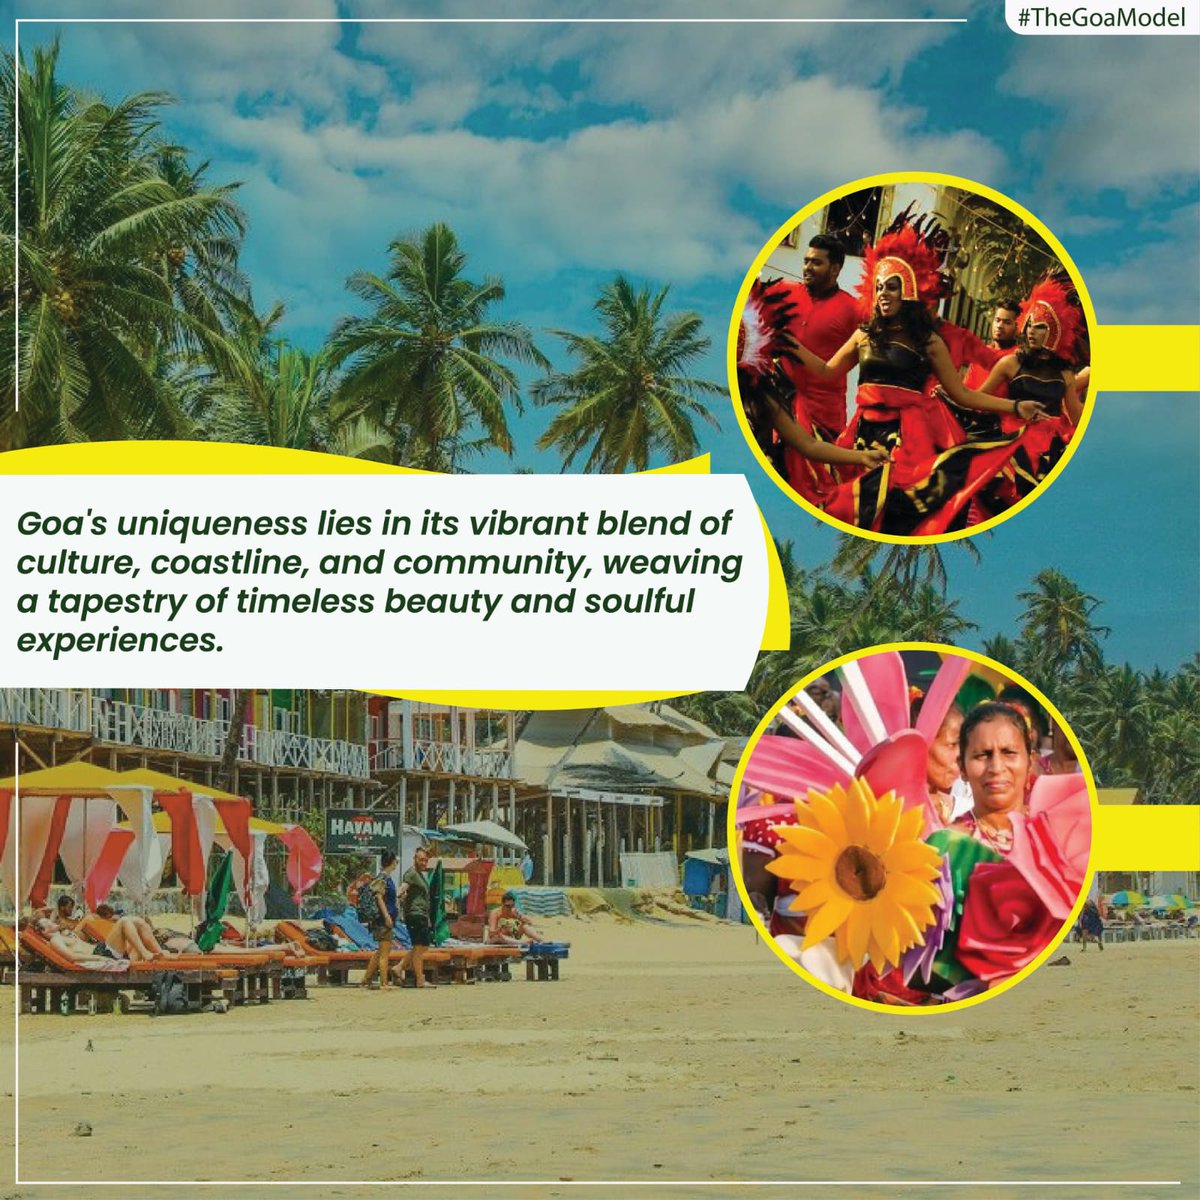 Goa's uniqueness lies in its vibrant blend of culture, coastline, and community, weaving a tapestry of timeless beauty and soulful experiences.
#TheGoaModel
#GoaCulture #GoaCoastline #GoaCommunity #TimelessBeauty #SoulfulExperiences #VibrantBlend #CulturalHeritage #CoastalCharm